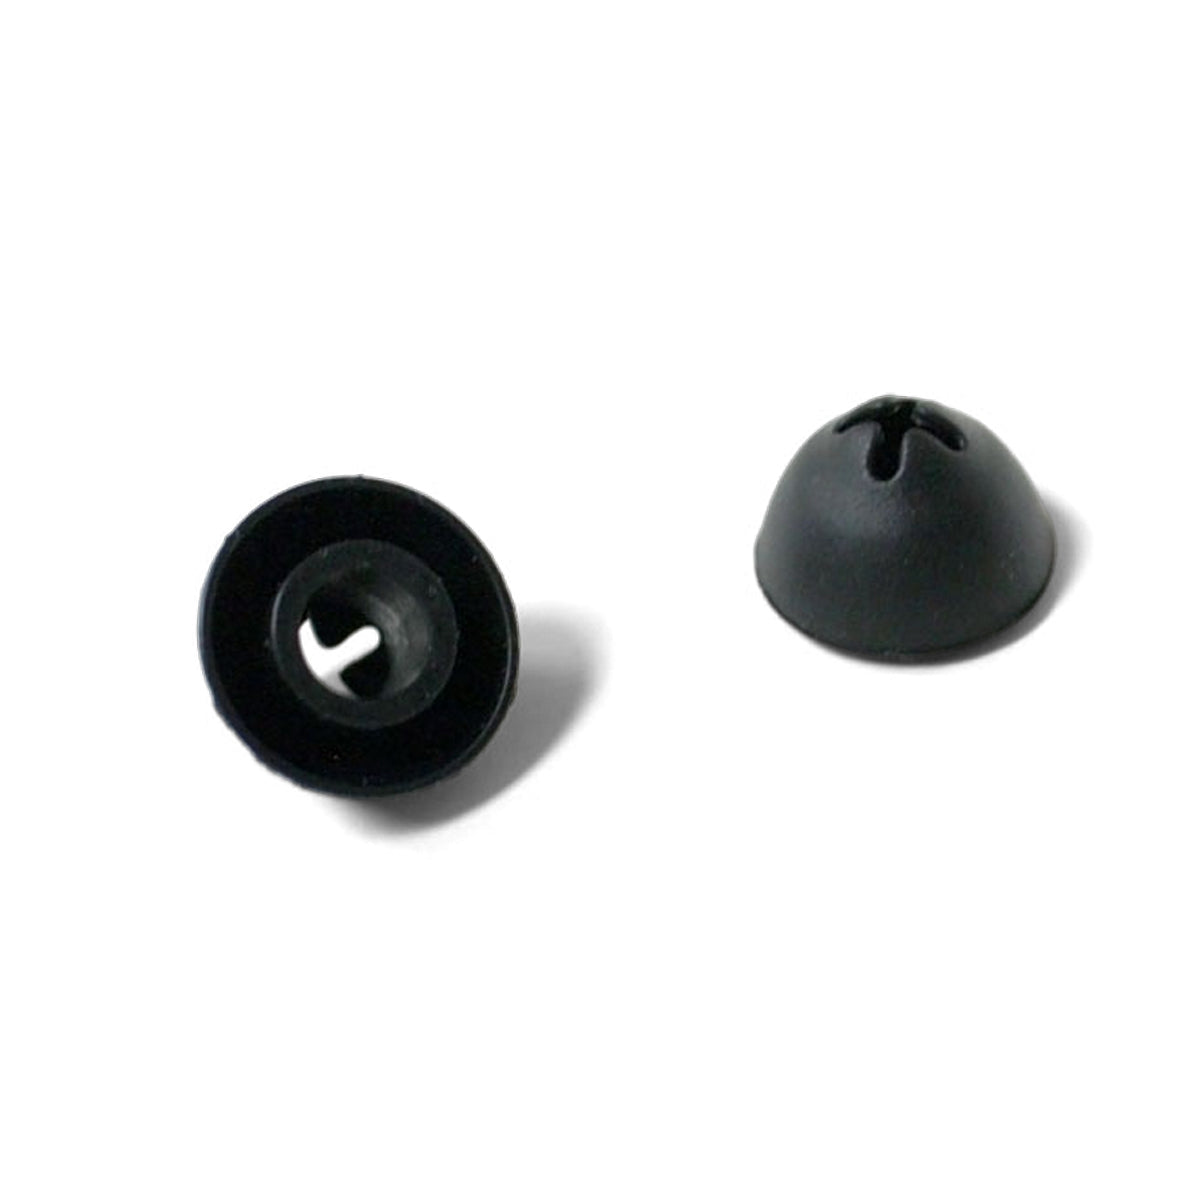 Williams Sound EAR 240 | WIR RX18 RX 240 WFM 260 Replacement Eartips